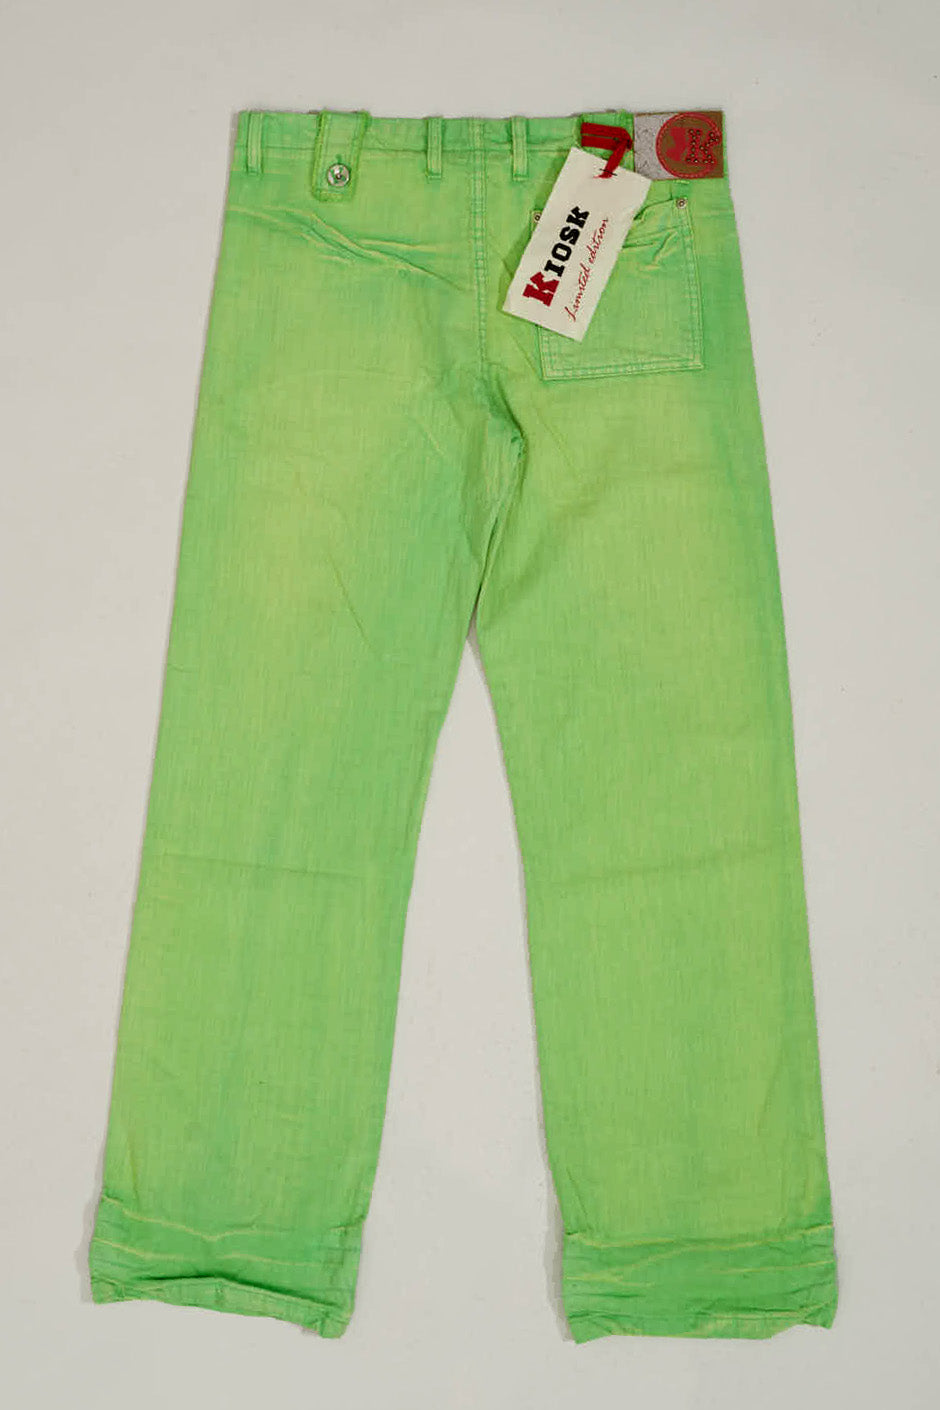 KIOSK LIMITED GREEN Trousers - L